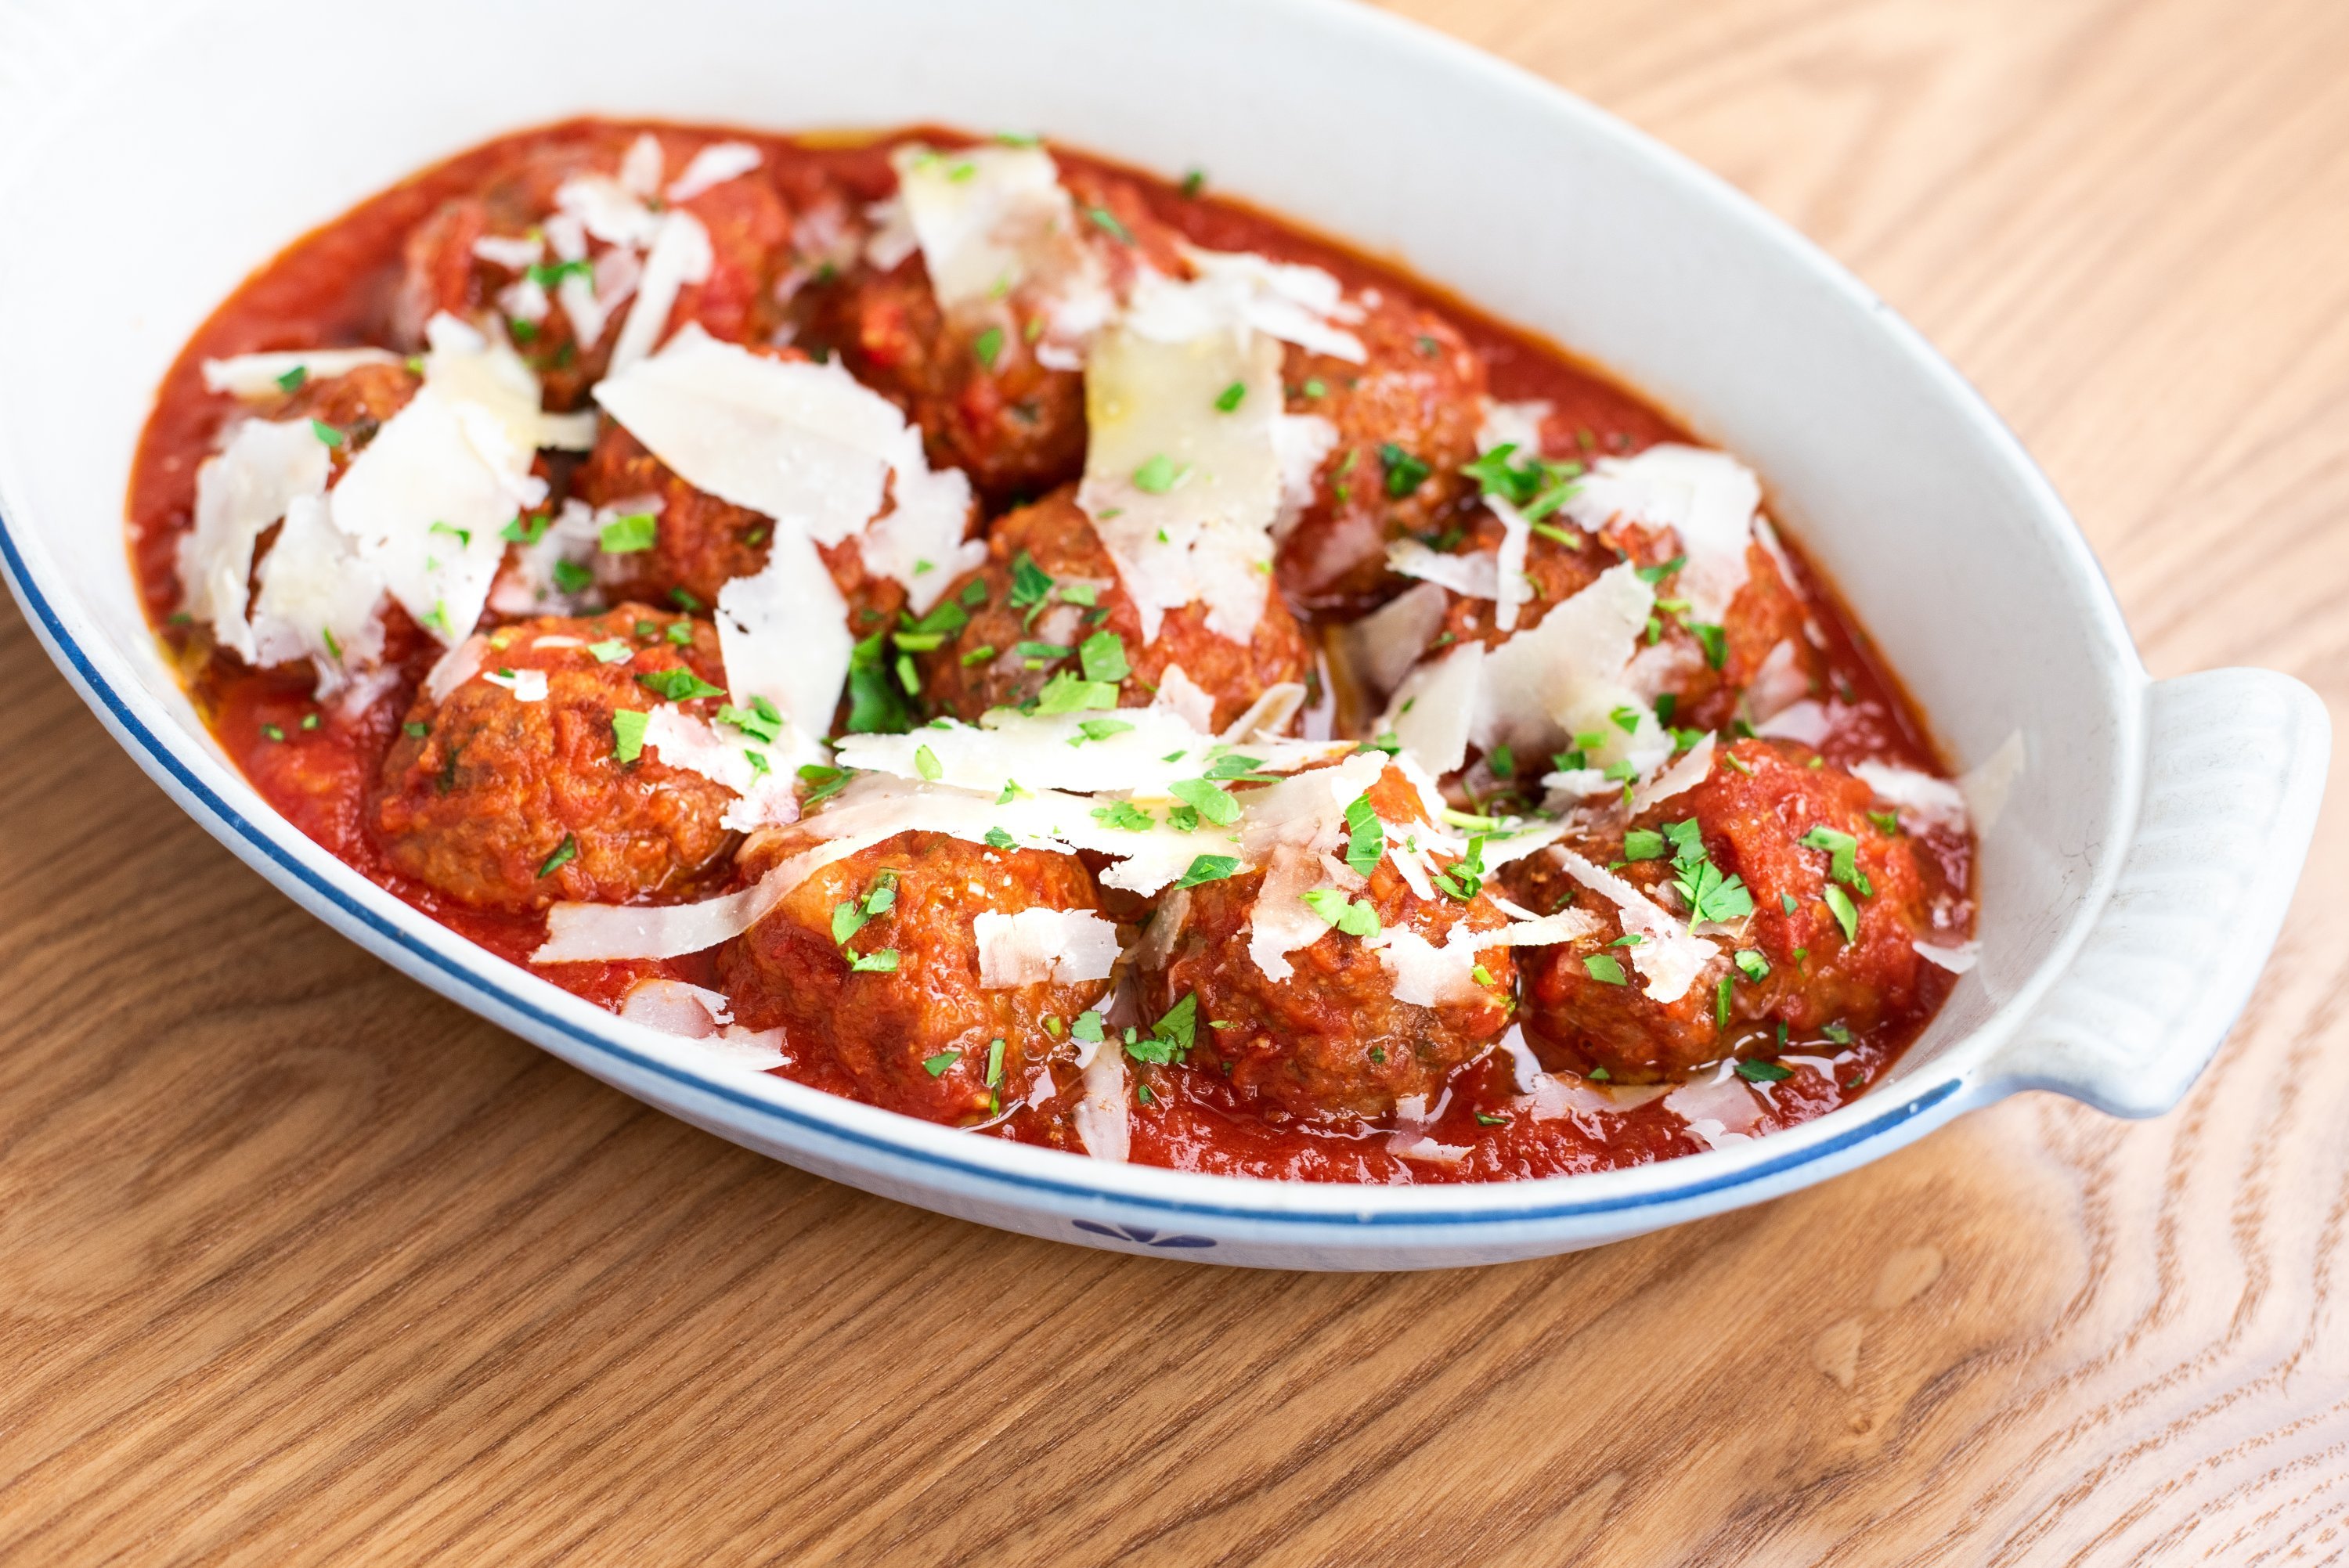 The spicy pork meatballs get their heat from cumin, paprika, and chili flakes. Photograph by Kelli Scott.